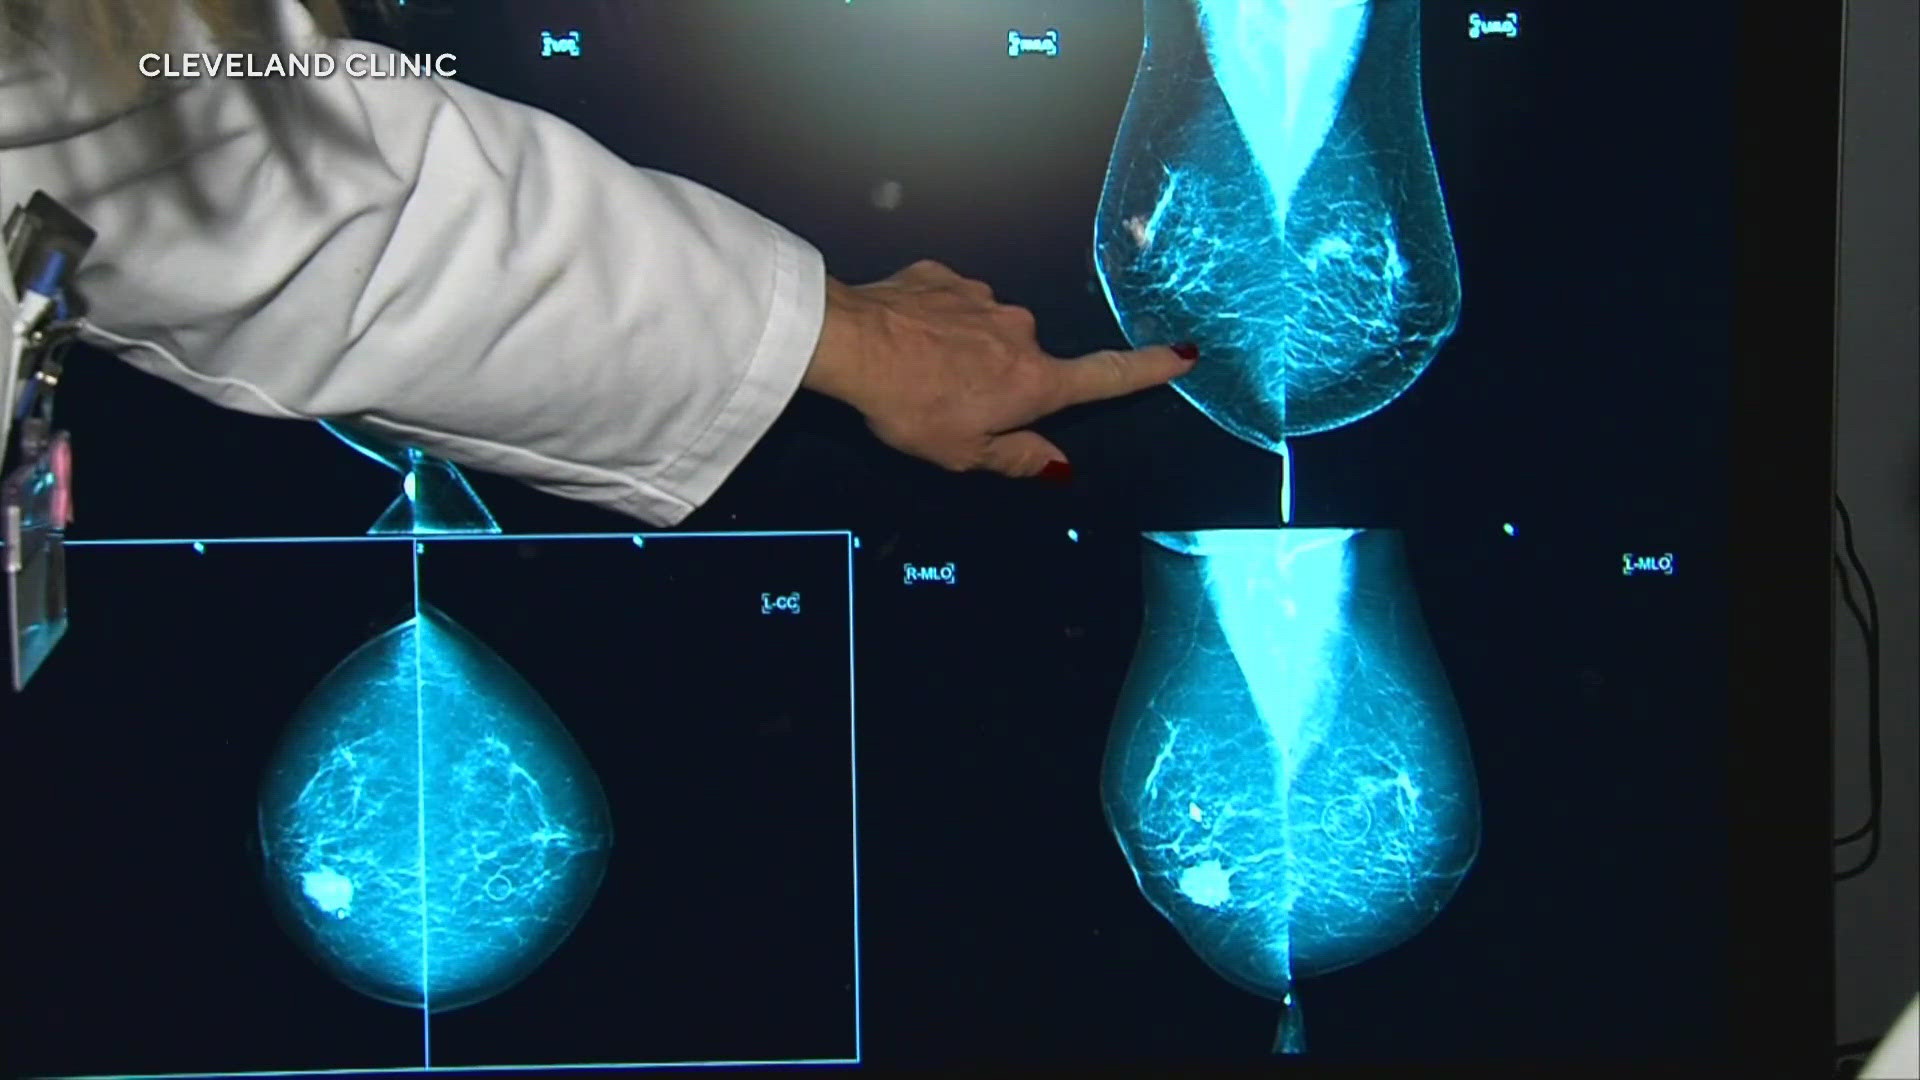 WUSA9 spoke with Lucy De La Cruz, MD at MedStar Georgetown University Hospital, who provided relevant recommendations for women.